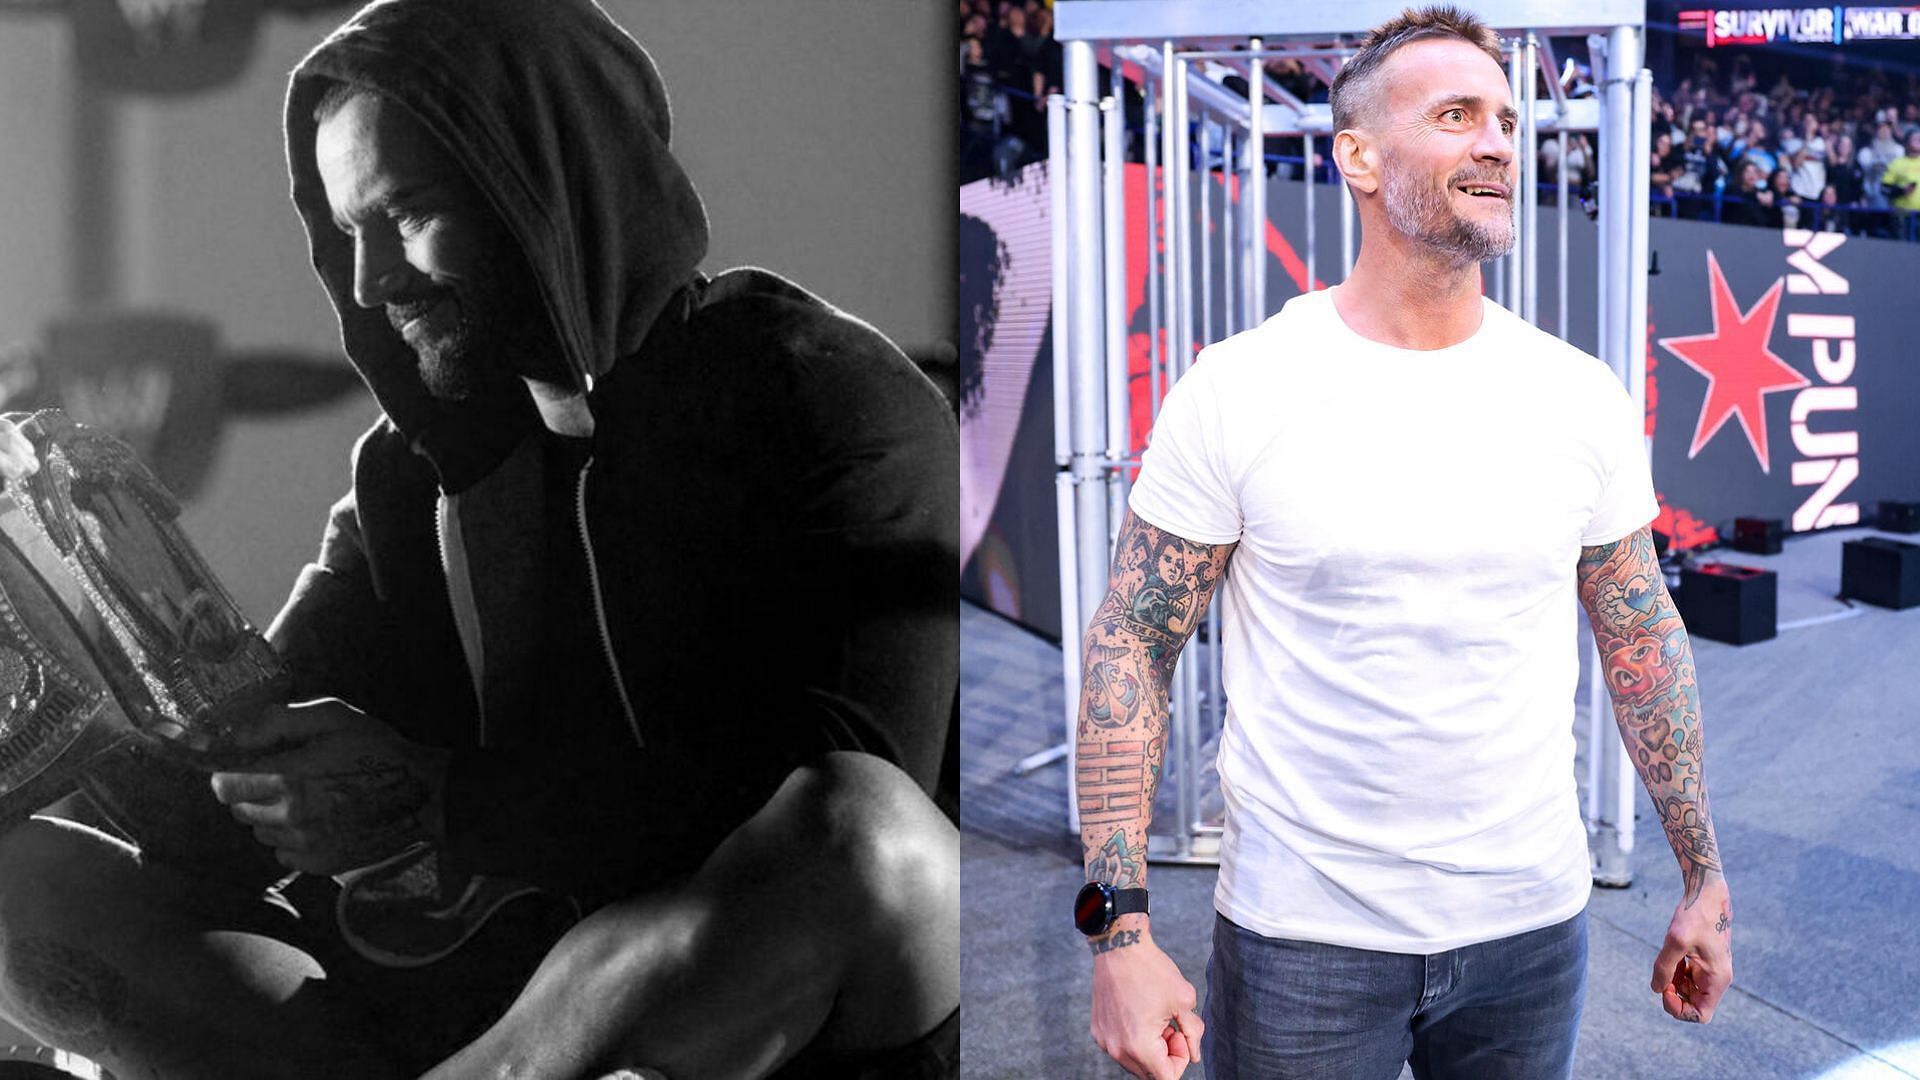 CM Punk in 2012 (left) and 2023 (right) [Image Credits: WWE]